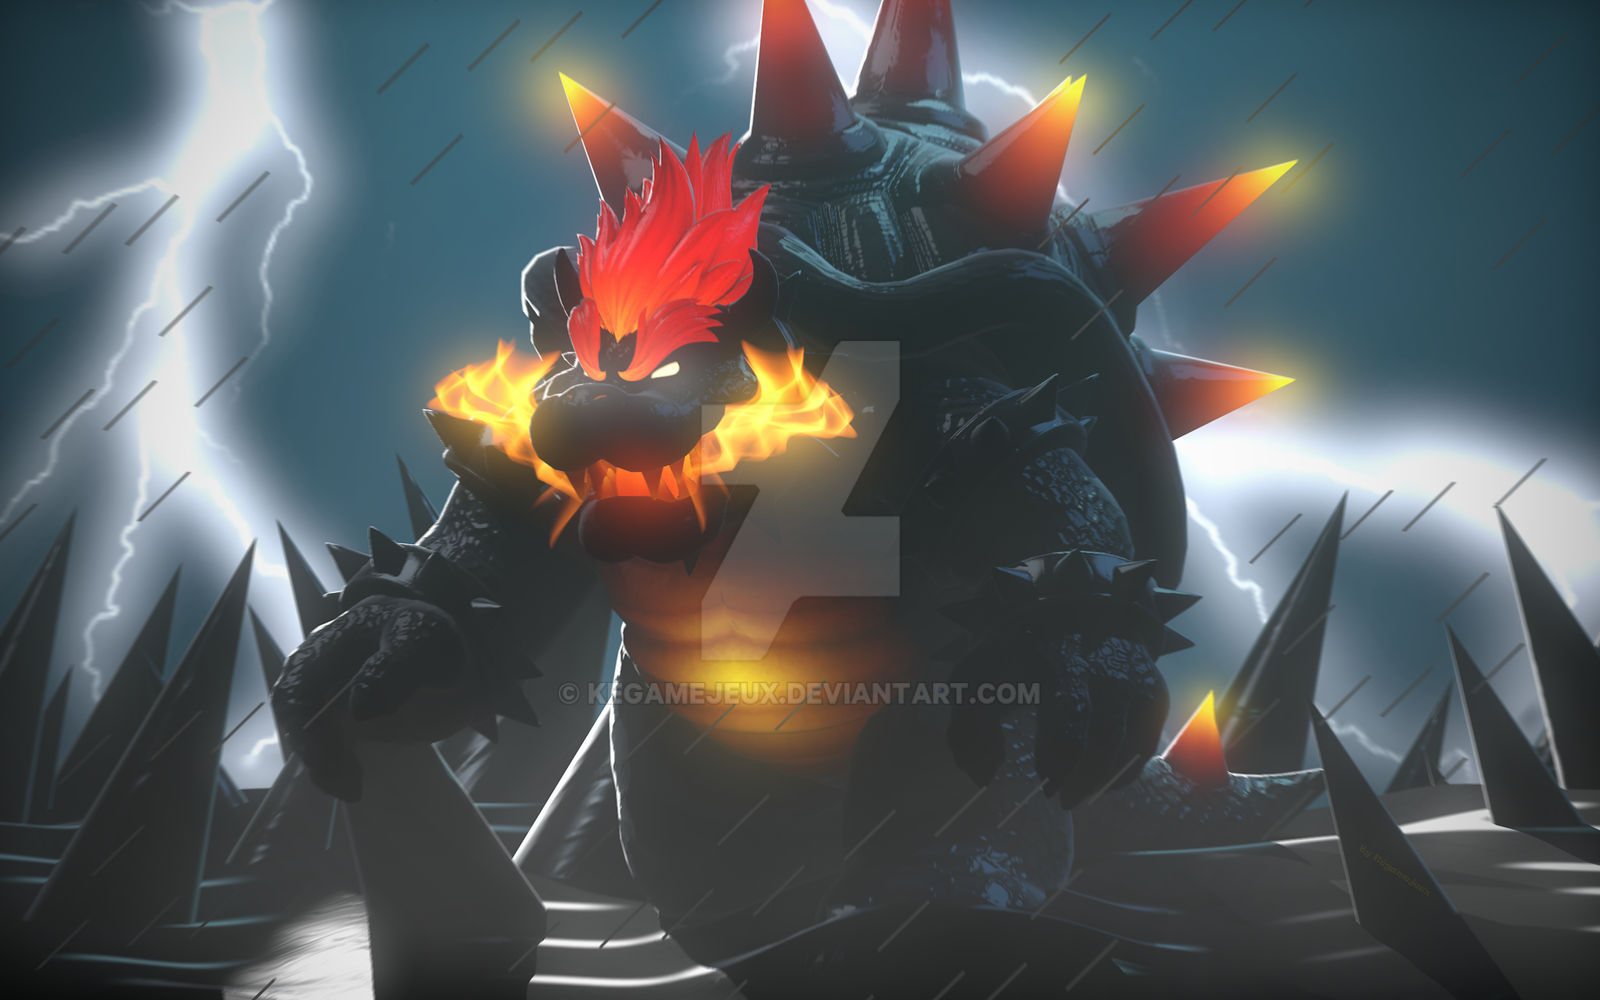 Bowser's Fury - Super Mario 3D World by rmgraphics1 on DeviantArt